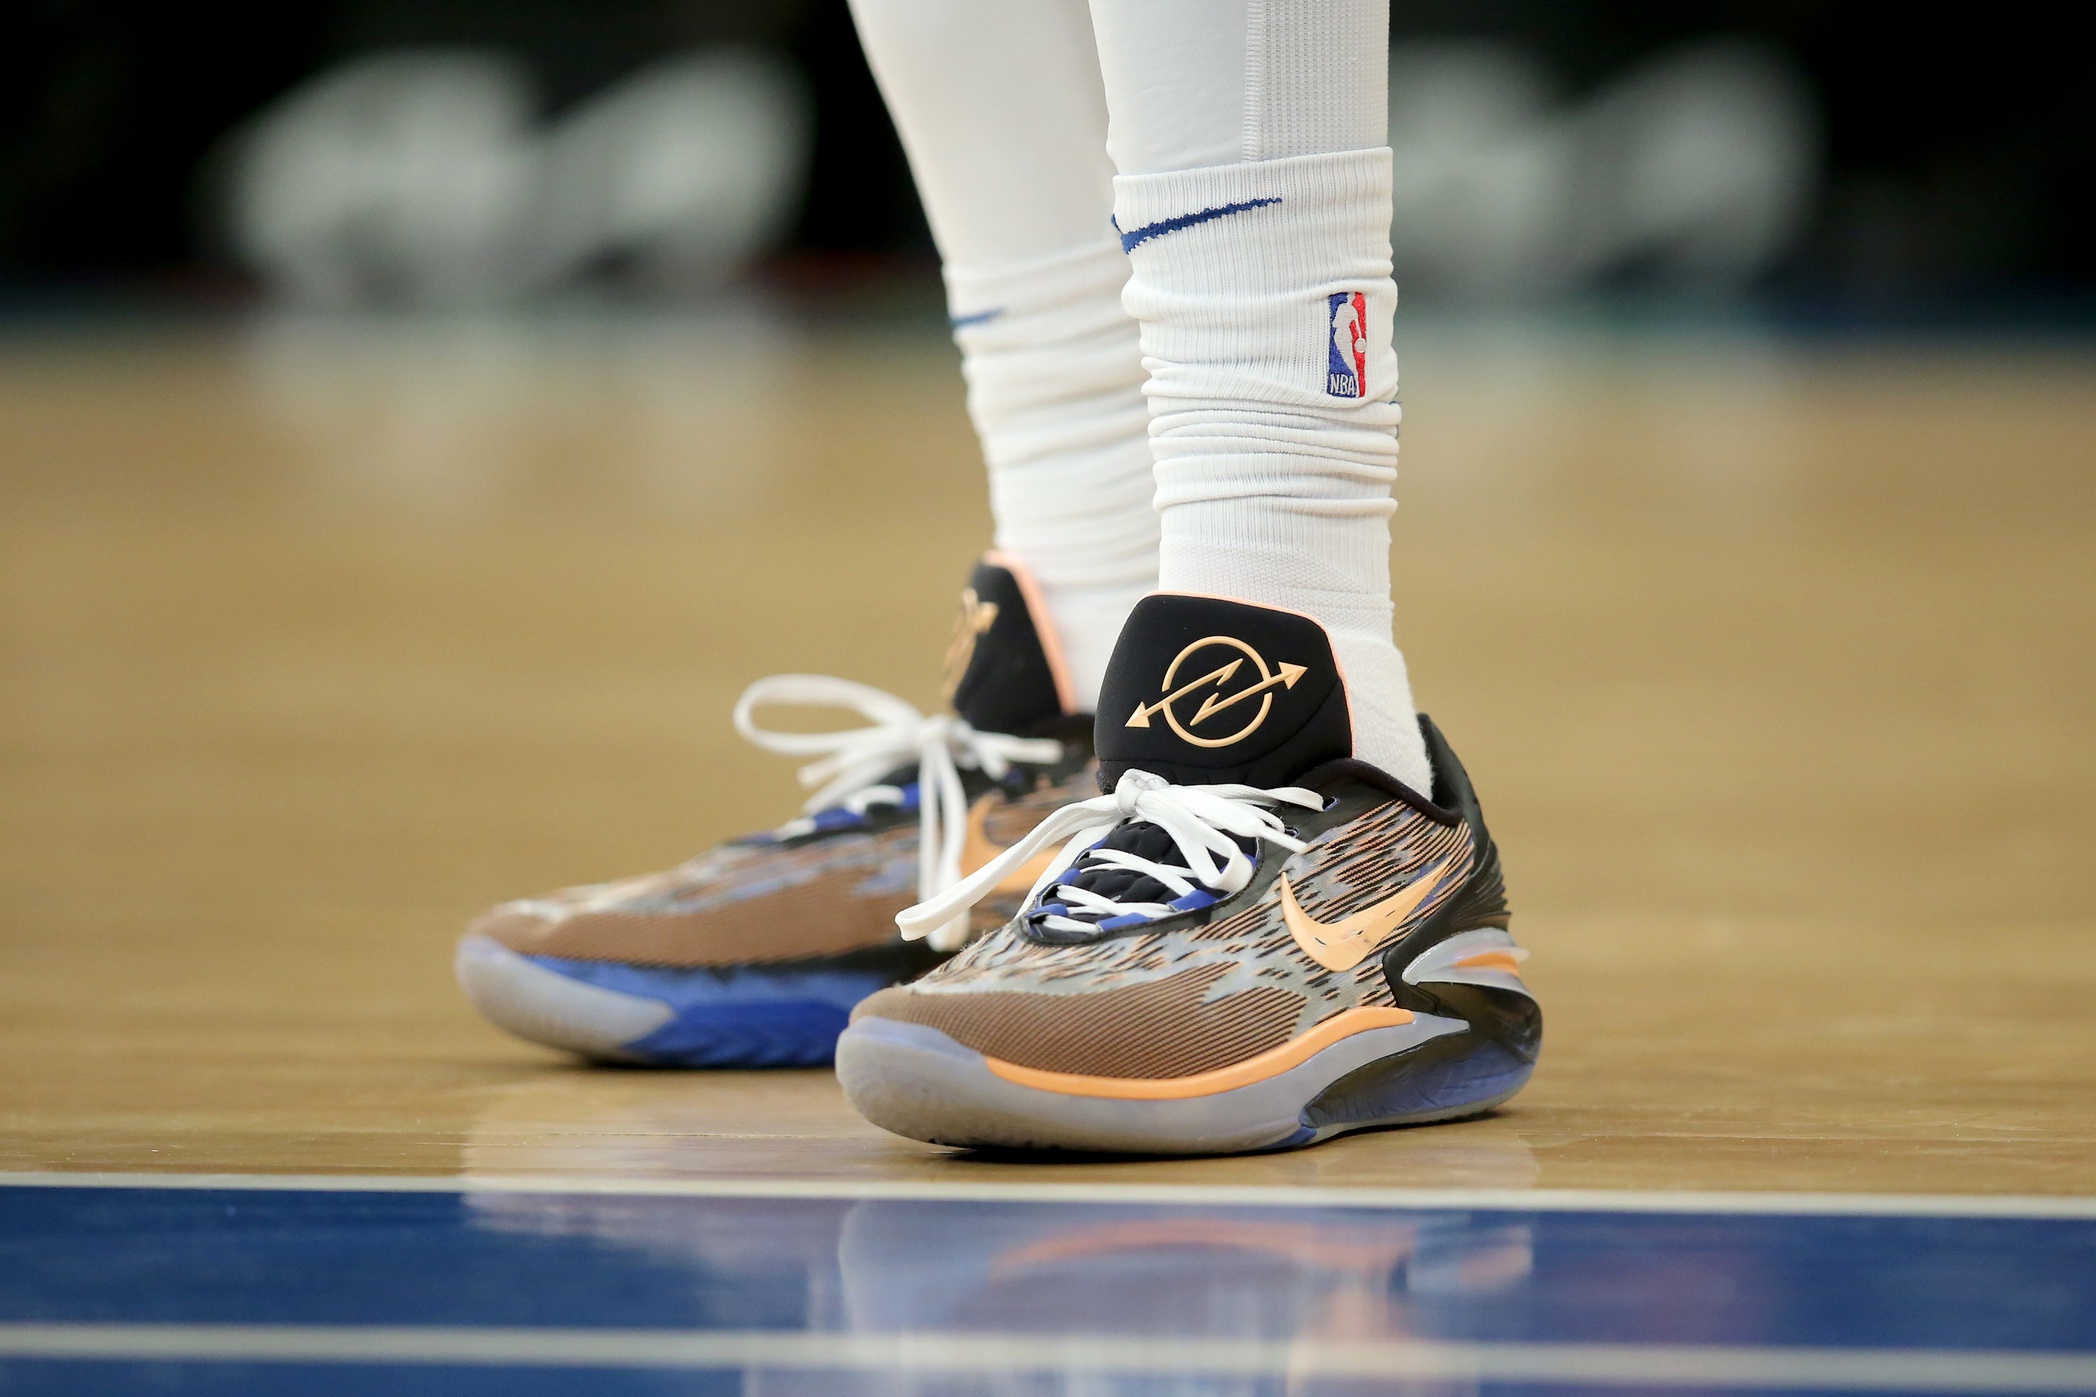 Mar 29, 2023; New York, New York, USA; Sneakers worn by New York Knicks forward Julius Randle (30) during the first quarter against the Miami Heat at Madison Square Garden. Mandatory Credit: Brad Penner-USA TODAY Sports